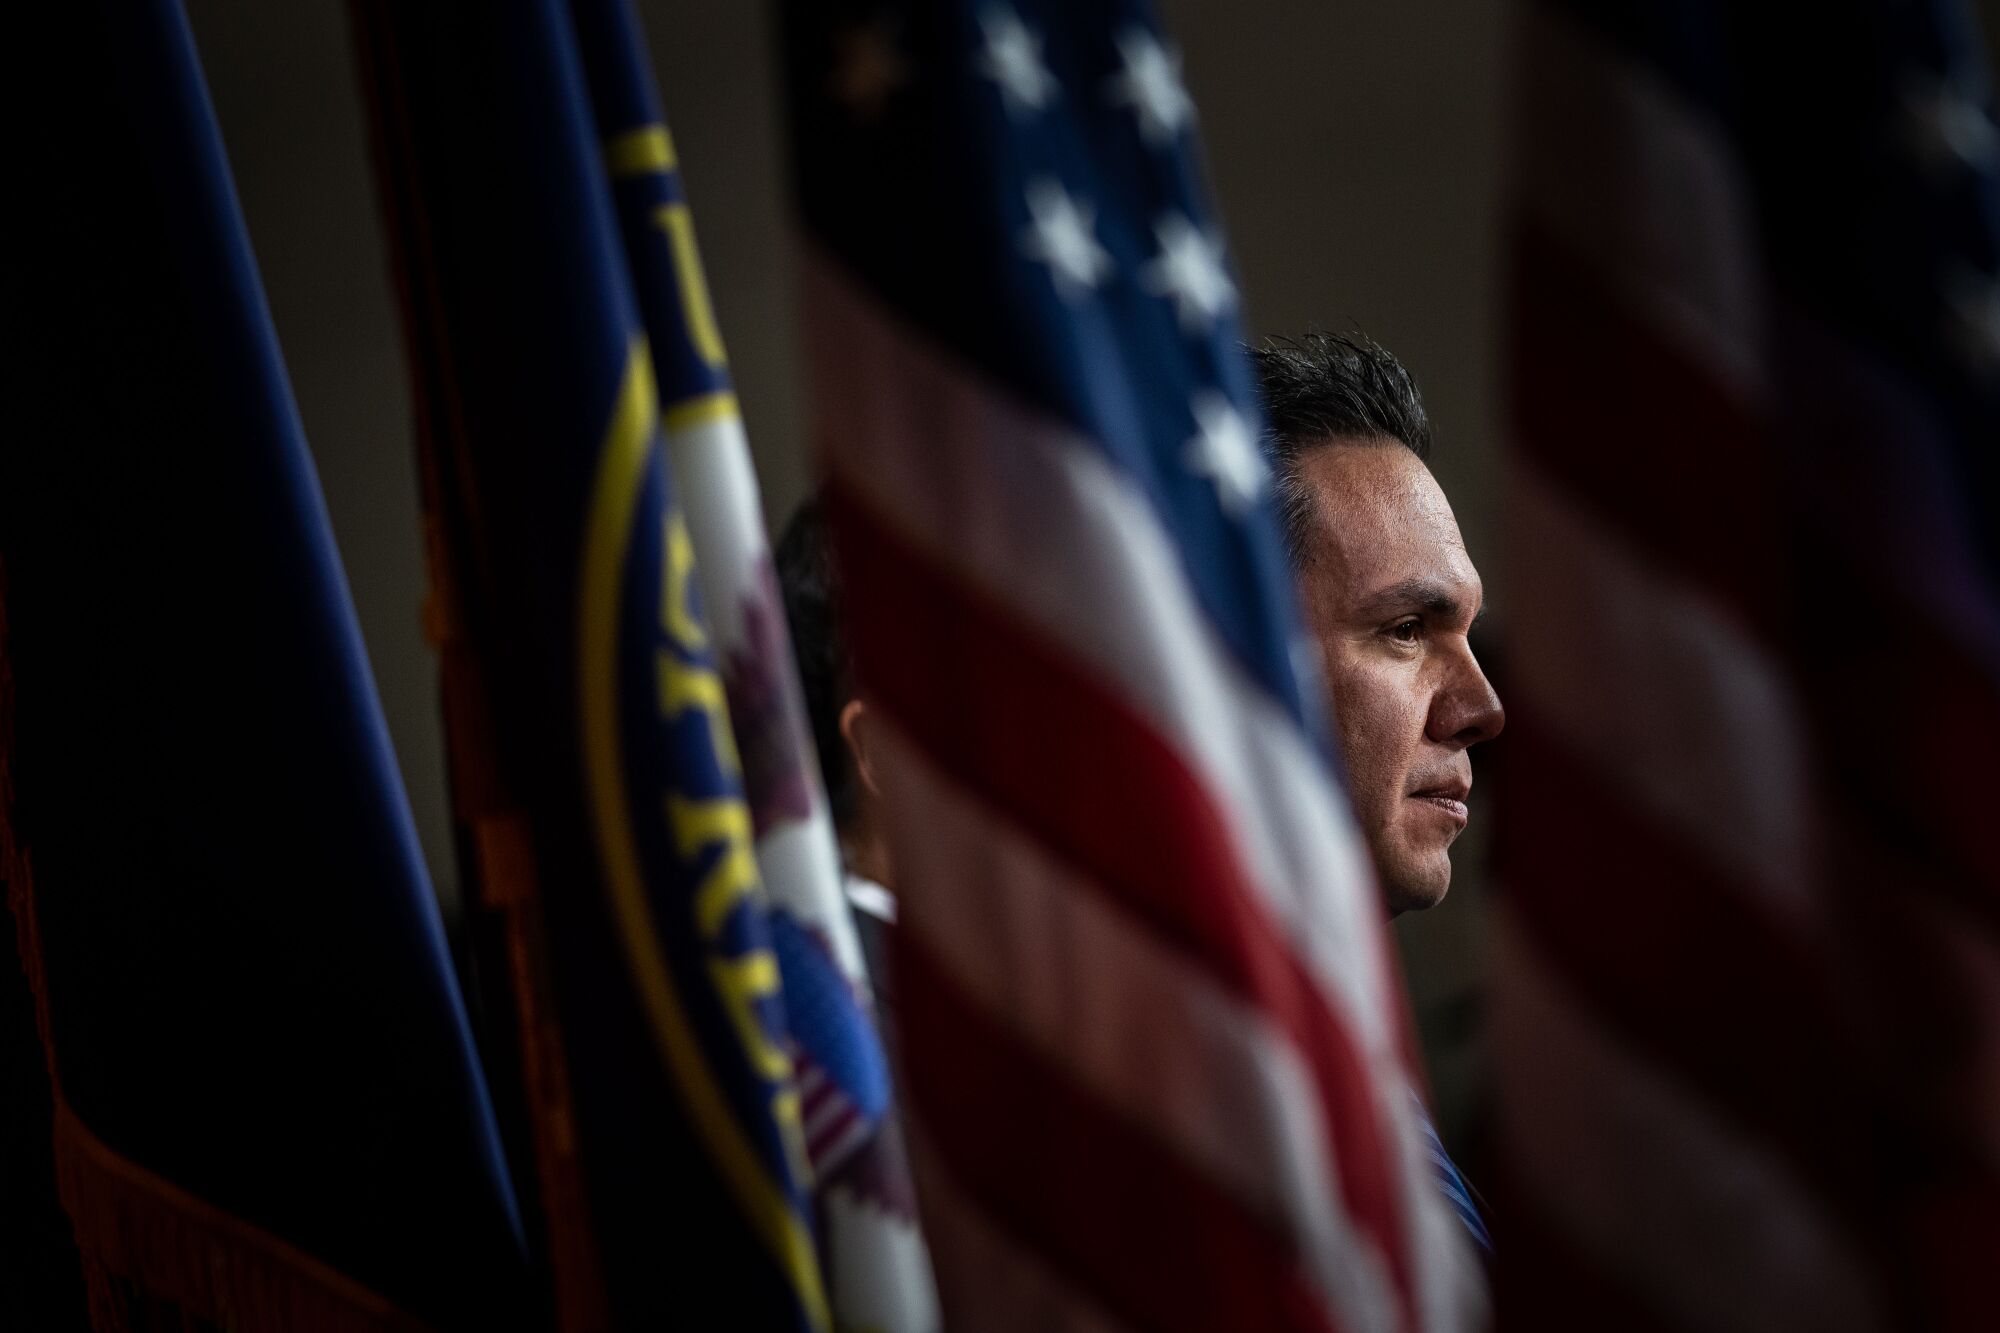 Pete Aguilar is framed head-and-shoulders from a profile, looking toward to right side, standing between flags.